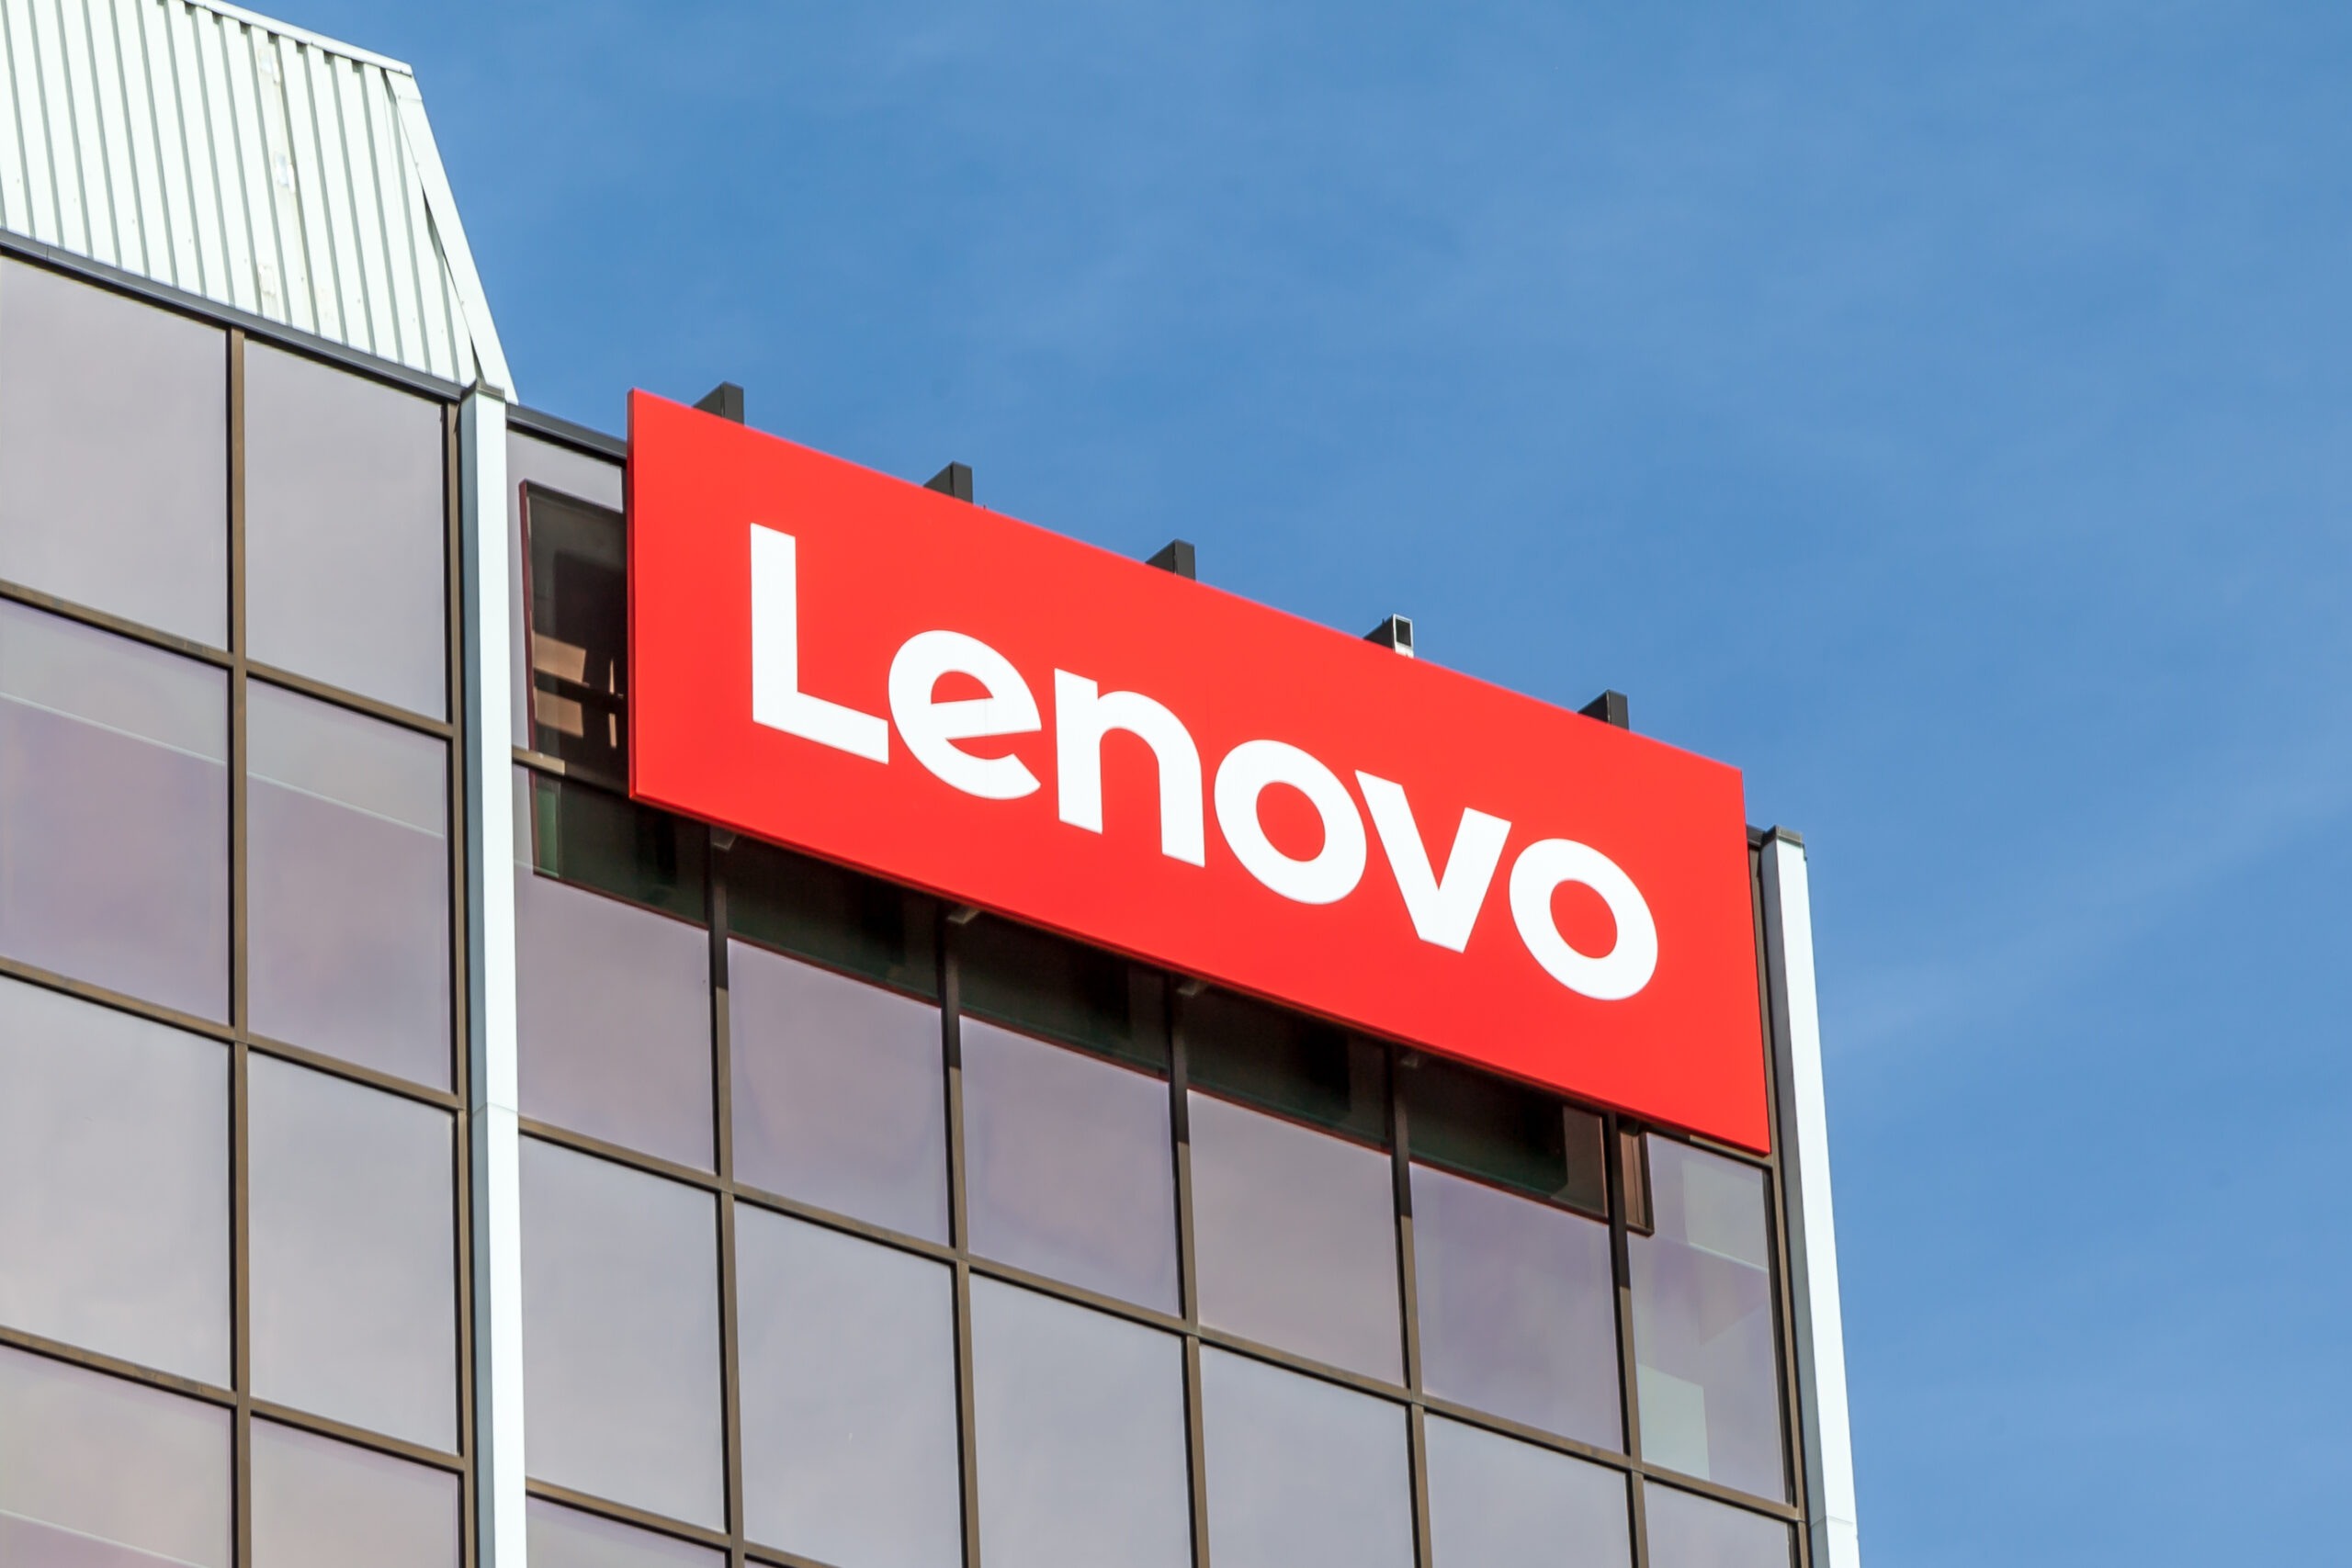 China's Lenovo Continues Revenue Growth Streak, Surpassing Expectations